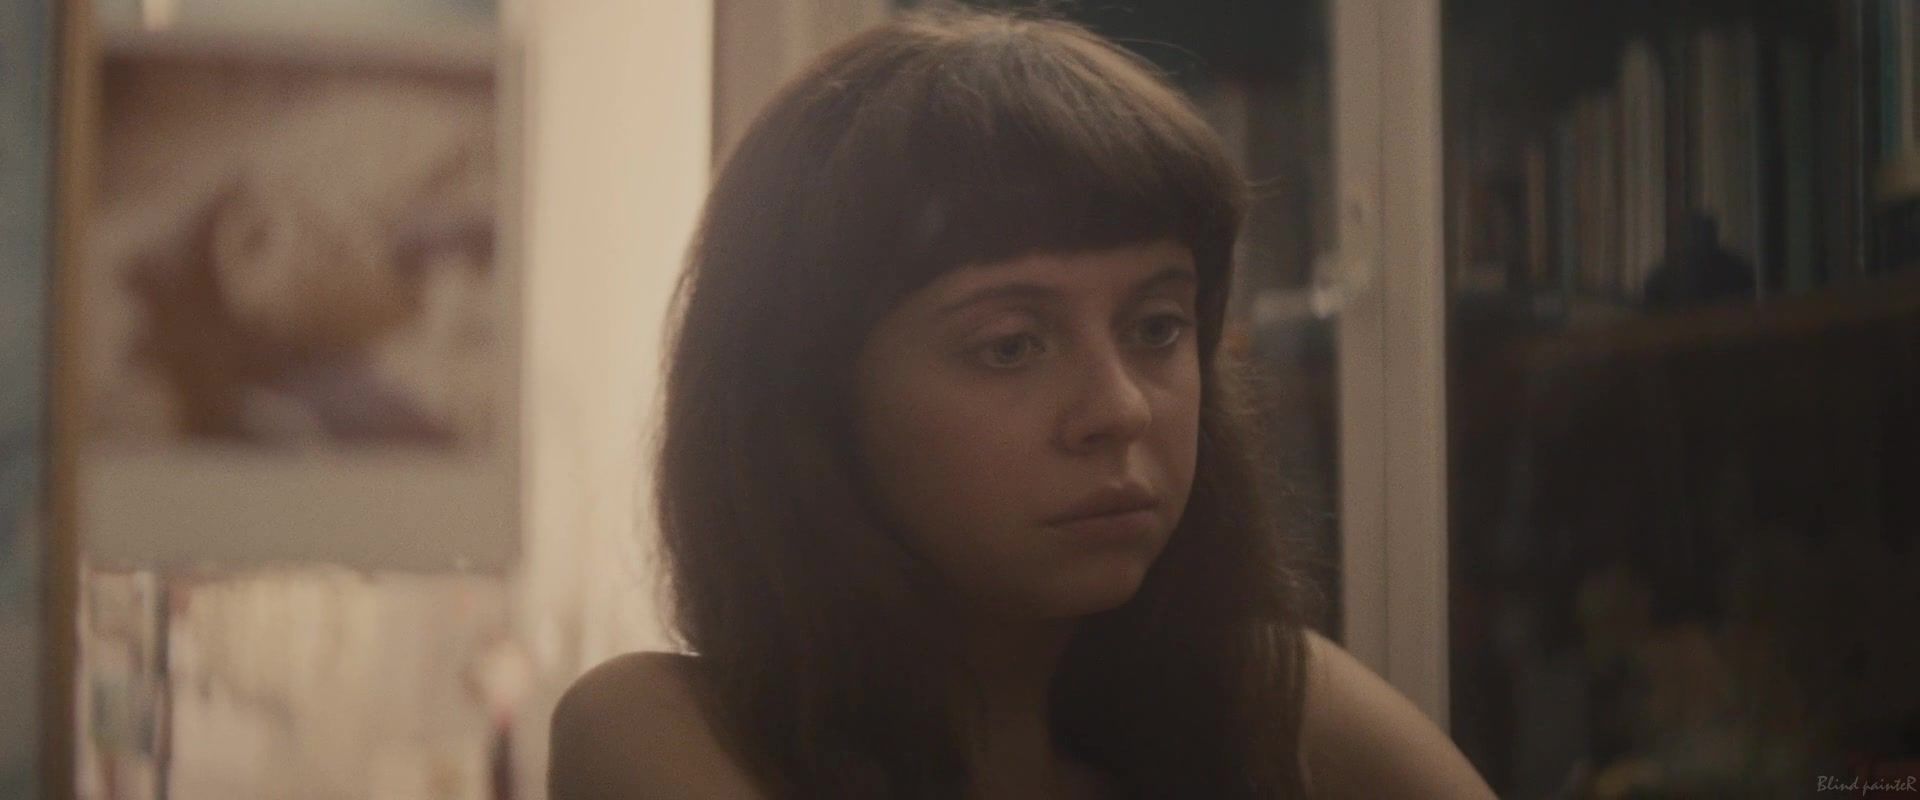 PerfectGirls Full Frontal and sex video | Celebrity Bel Powley nude from the movie "The Diary Of A Teenage Girl" (2015) Shavedpussy